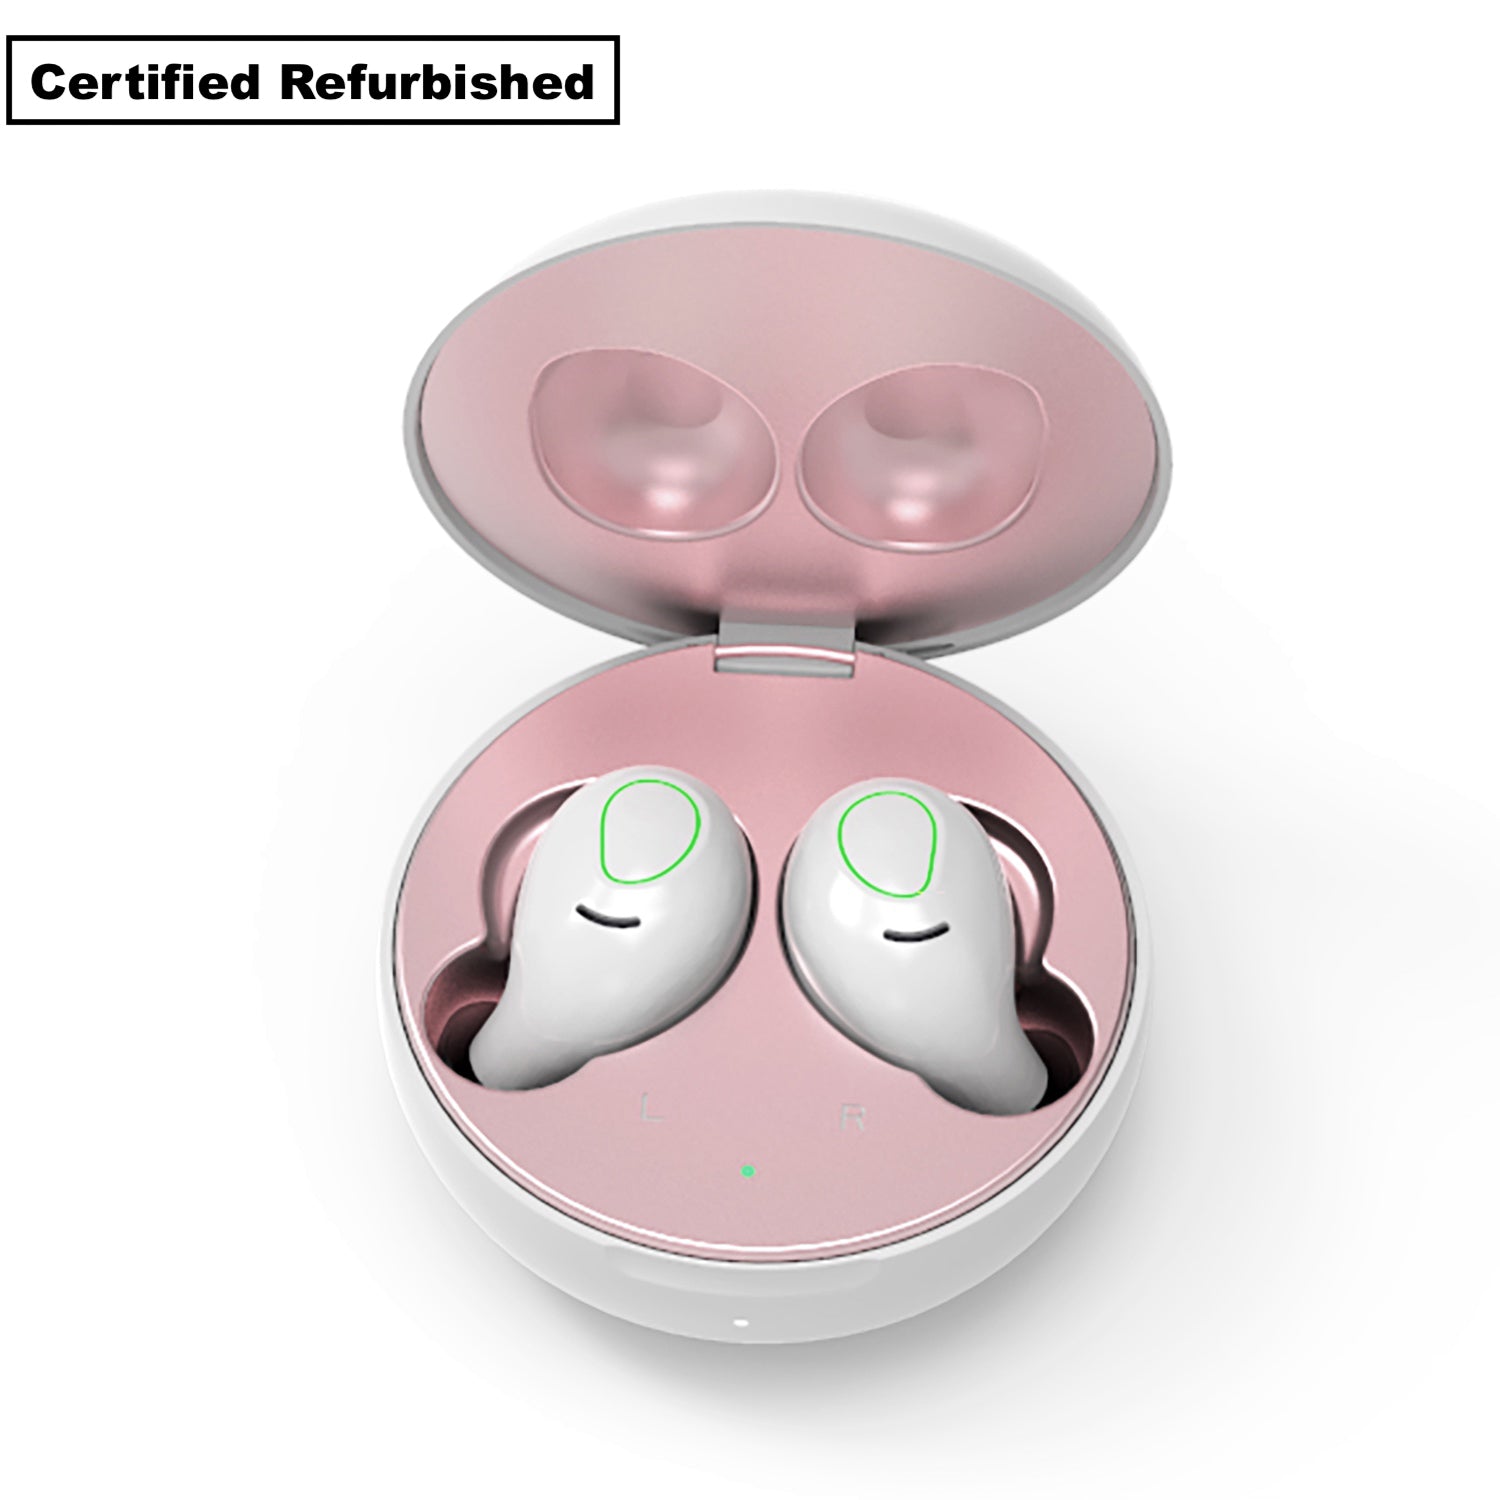 AIR ZEN 2.0 Pearl White and Rose Gold Earbuds (In Ear Wireless Headphones) - Grade B